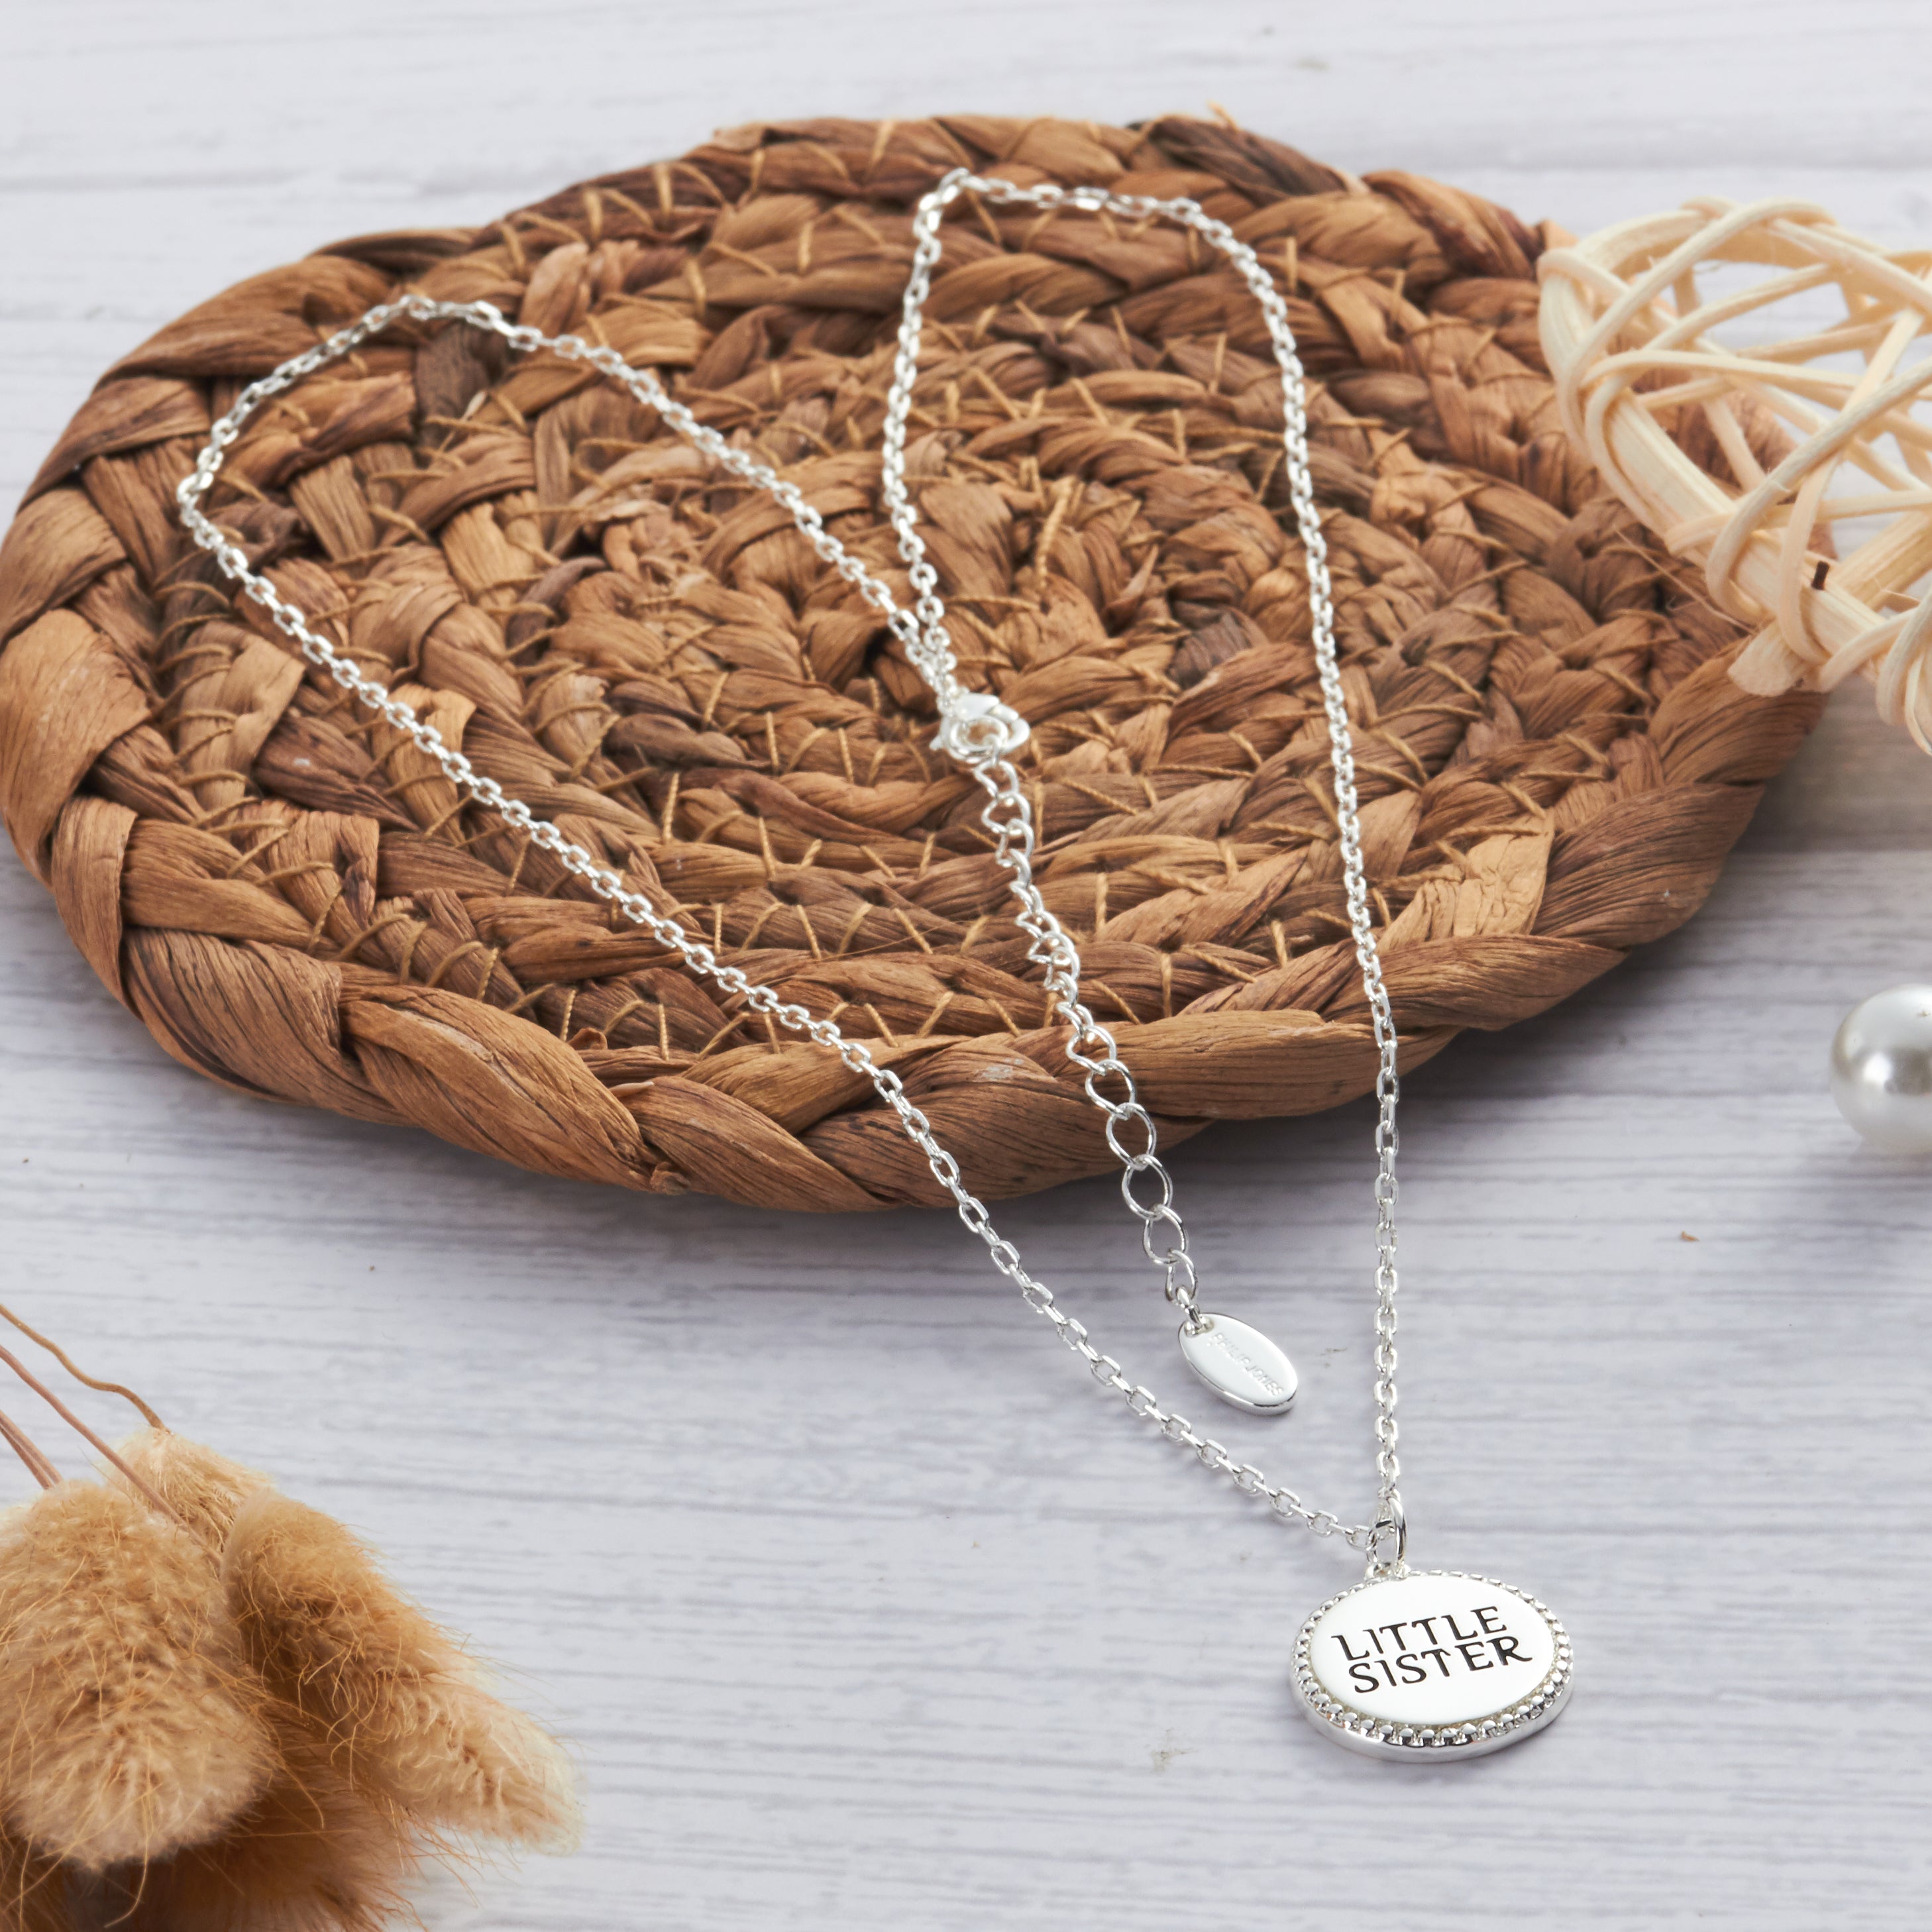 Silver Plated Filigree Disc Little Sister Necklace